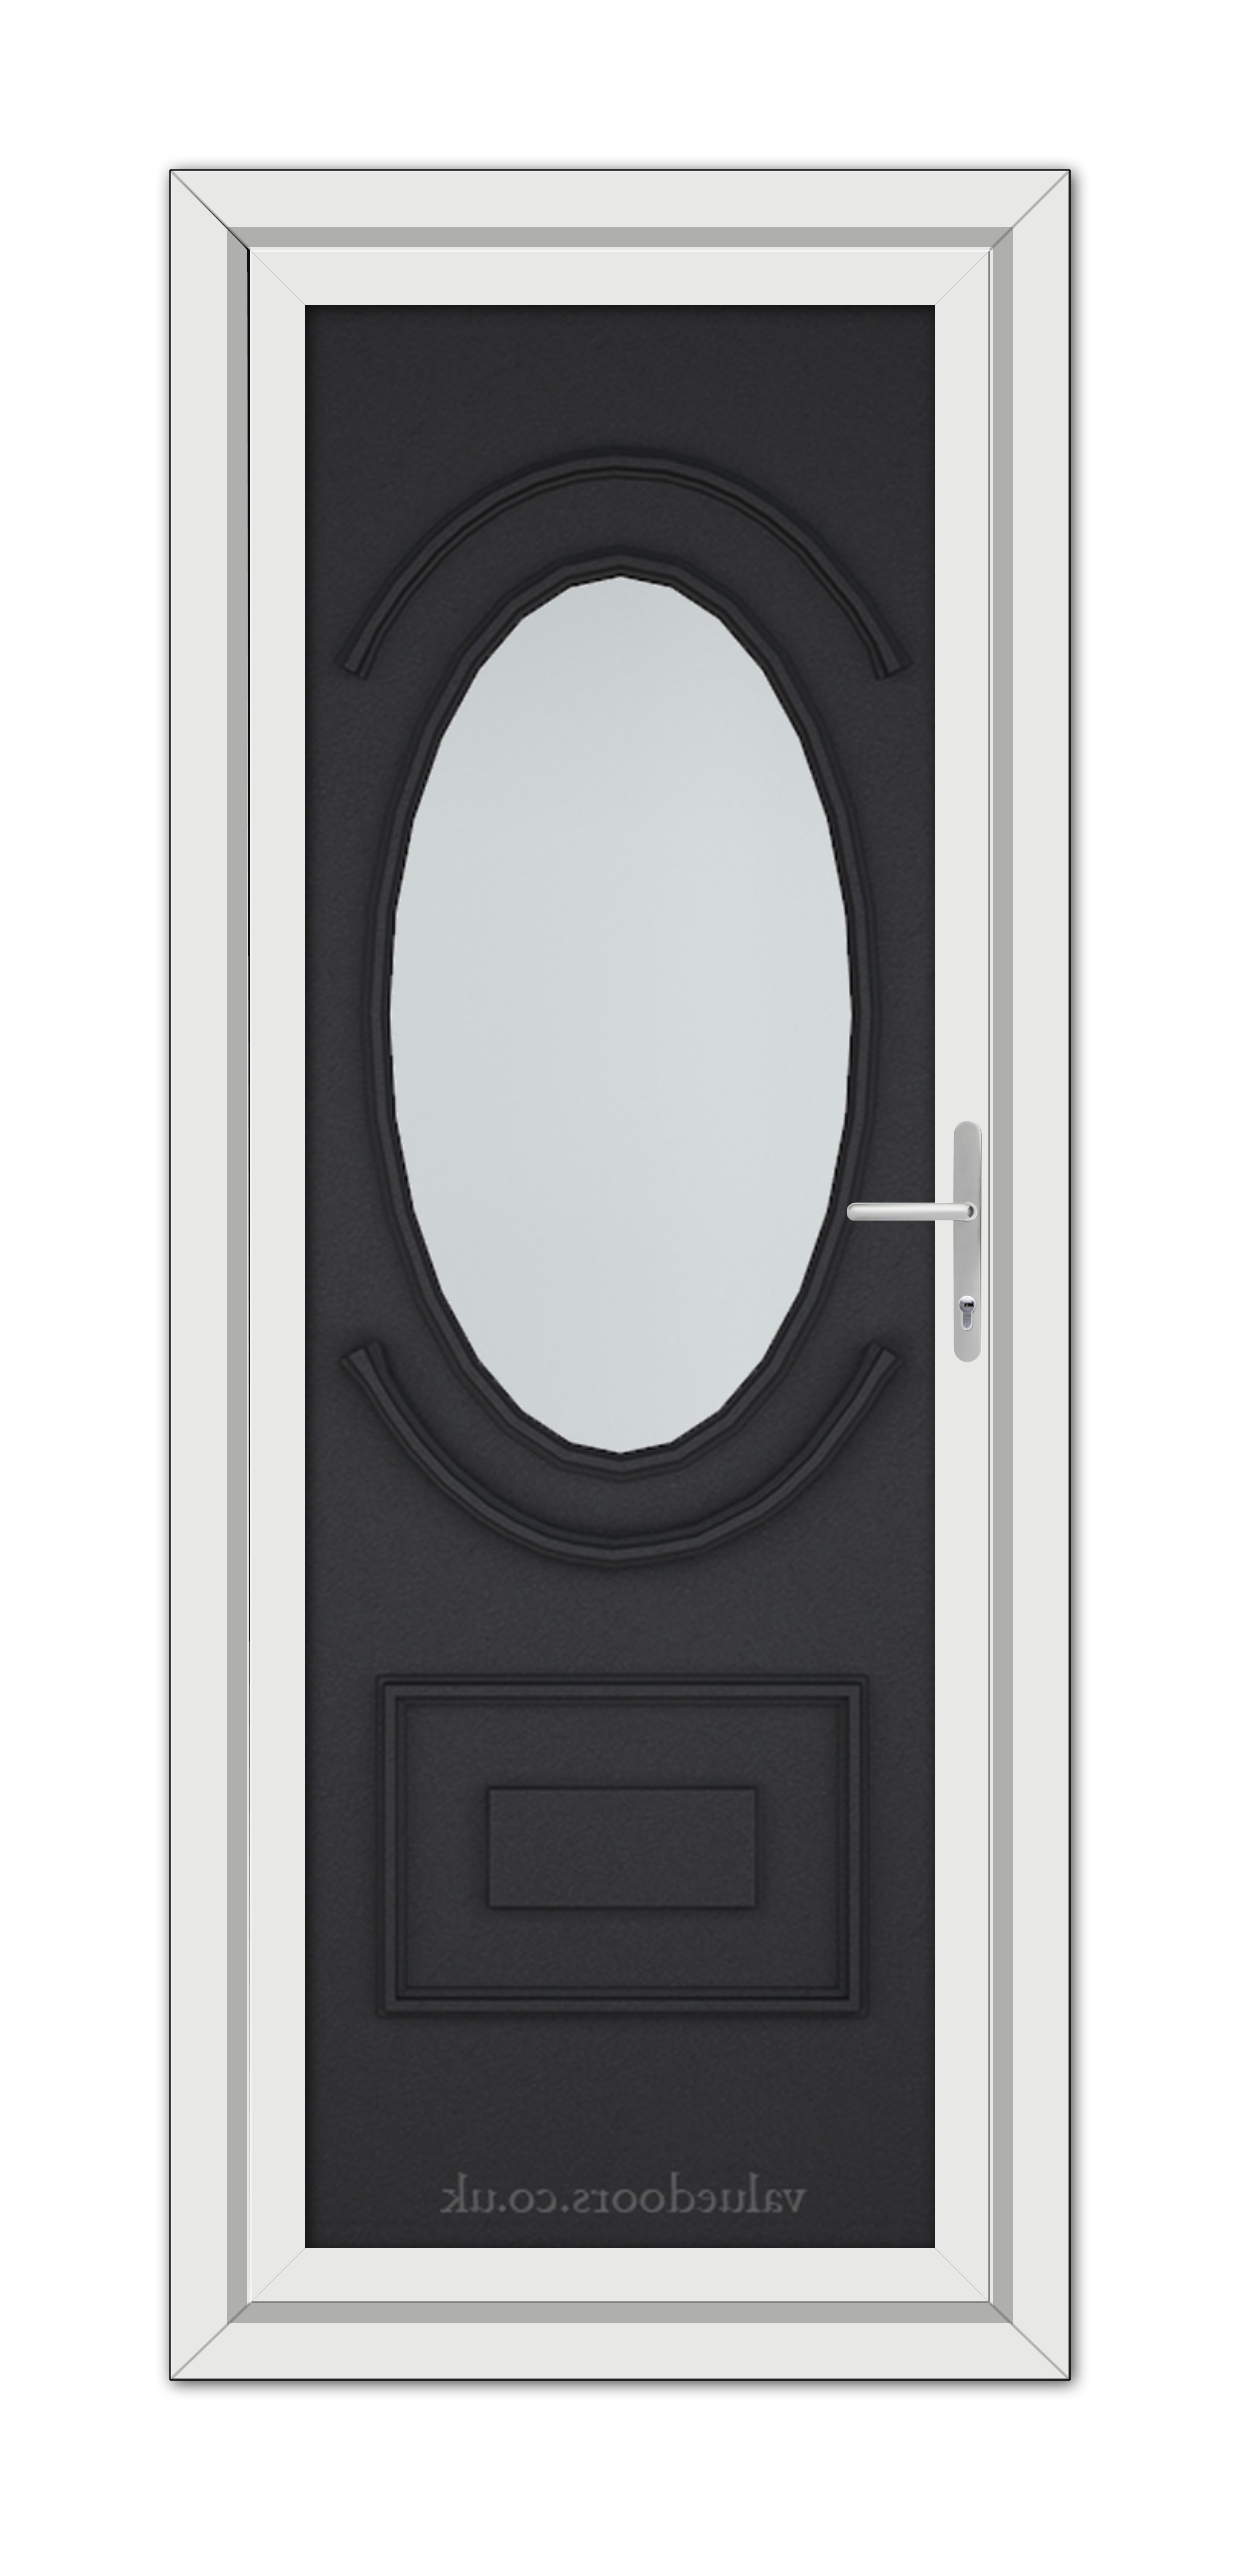 A modern, Black Brown Richmond uPVC door with an oval glass window and a rectangular panel below framed in white. the door handle is on the right side.